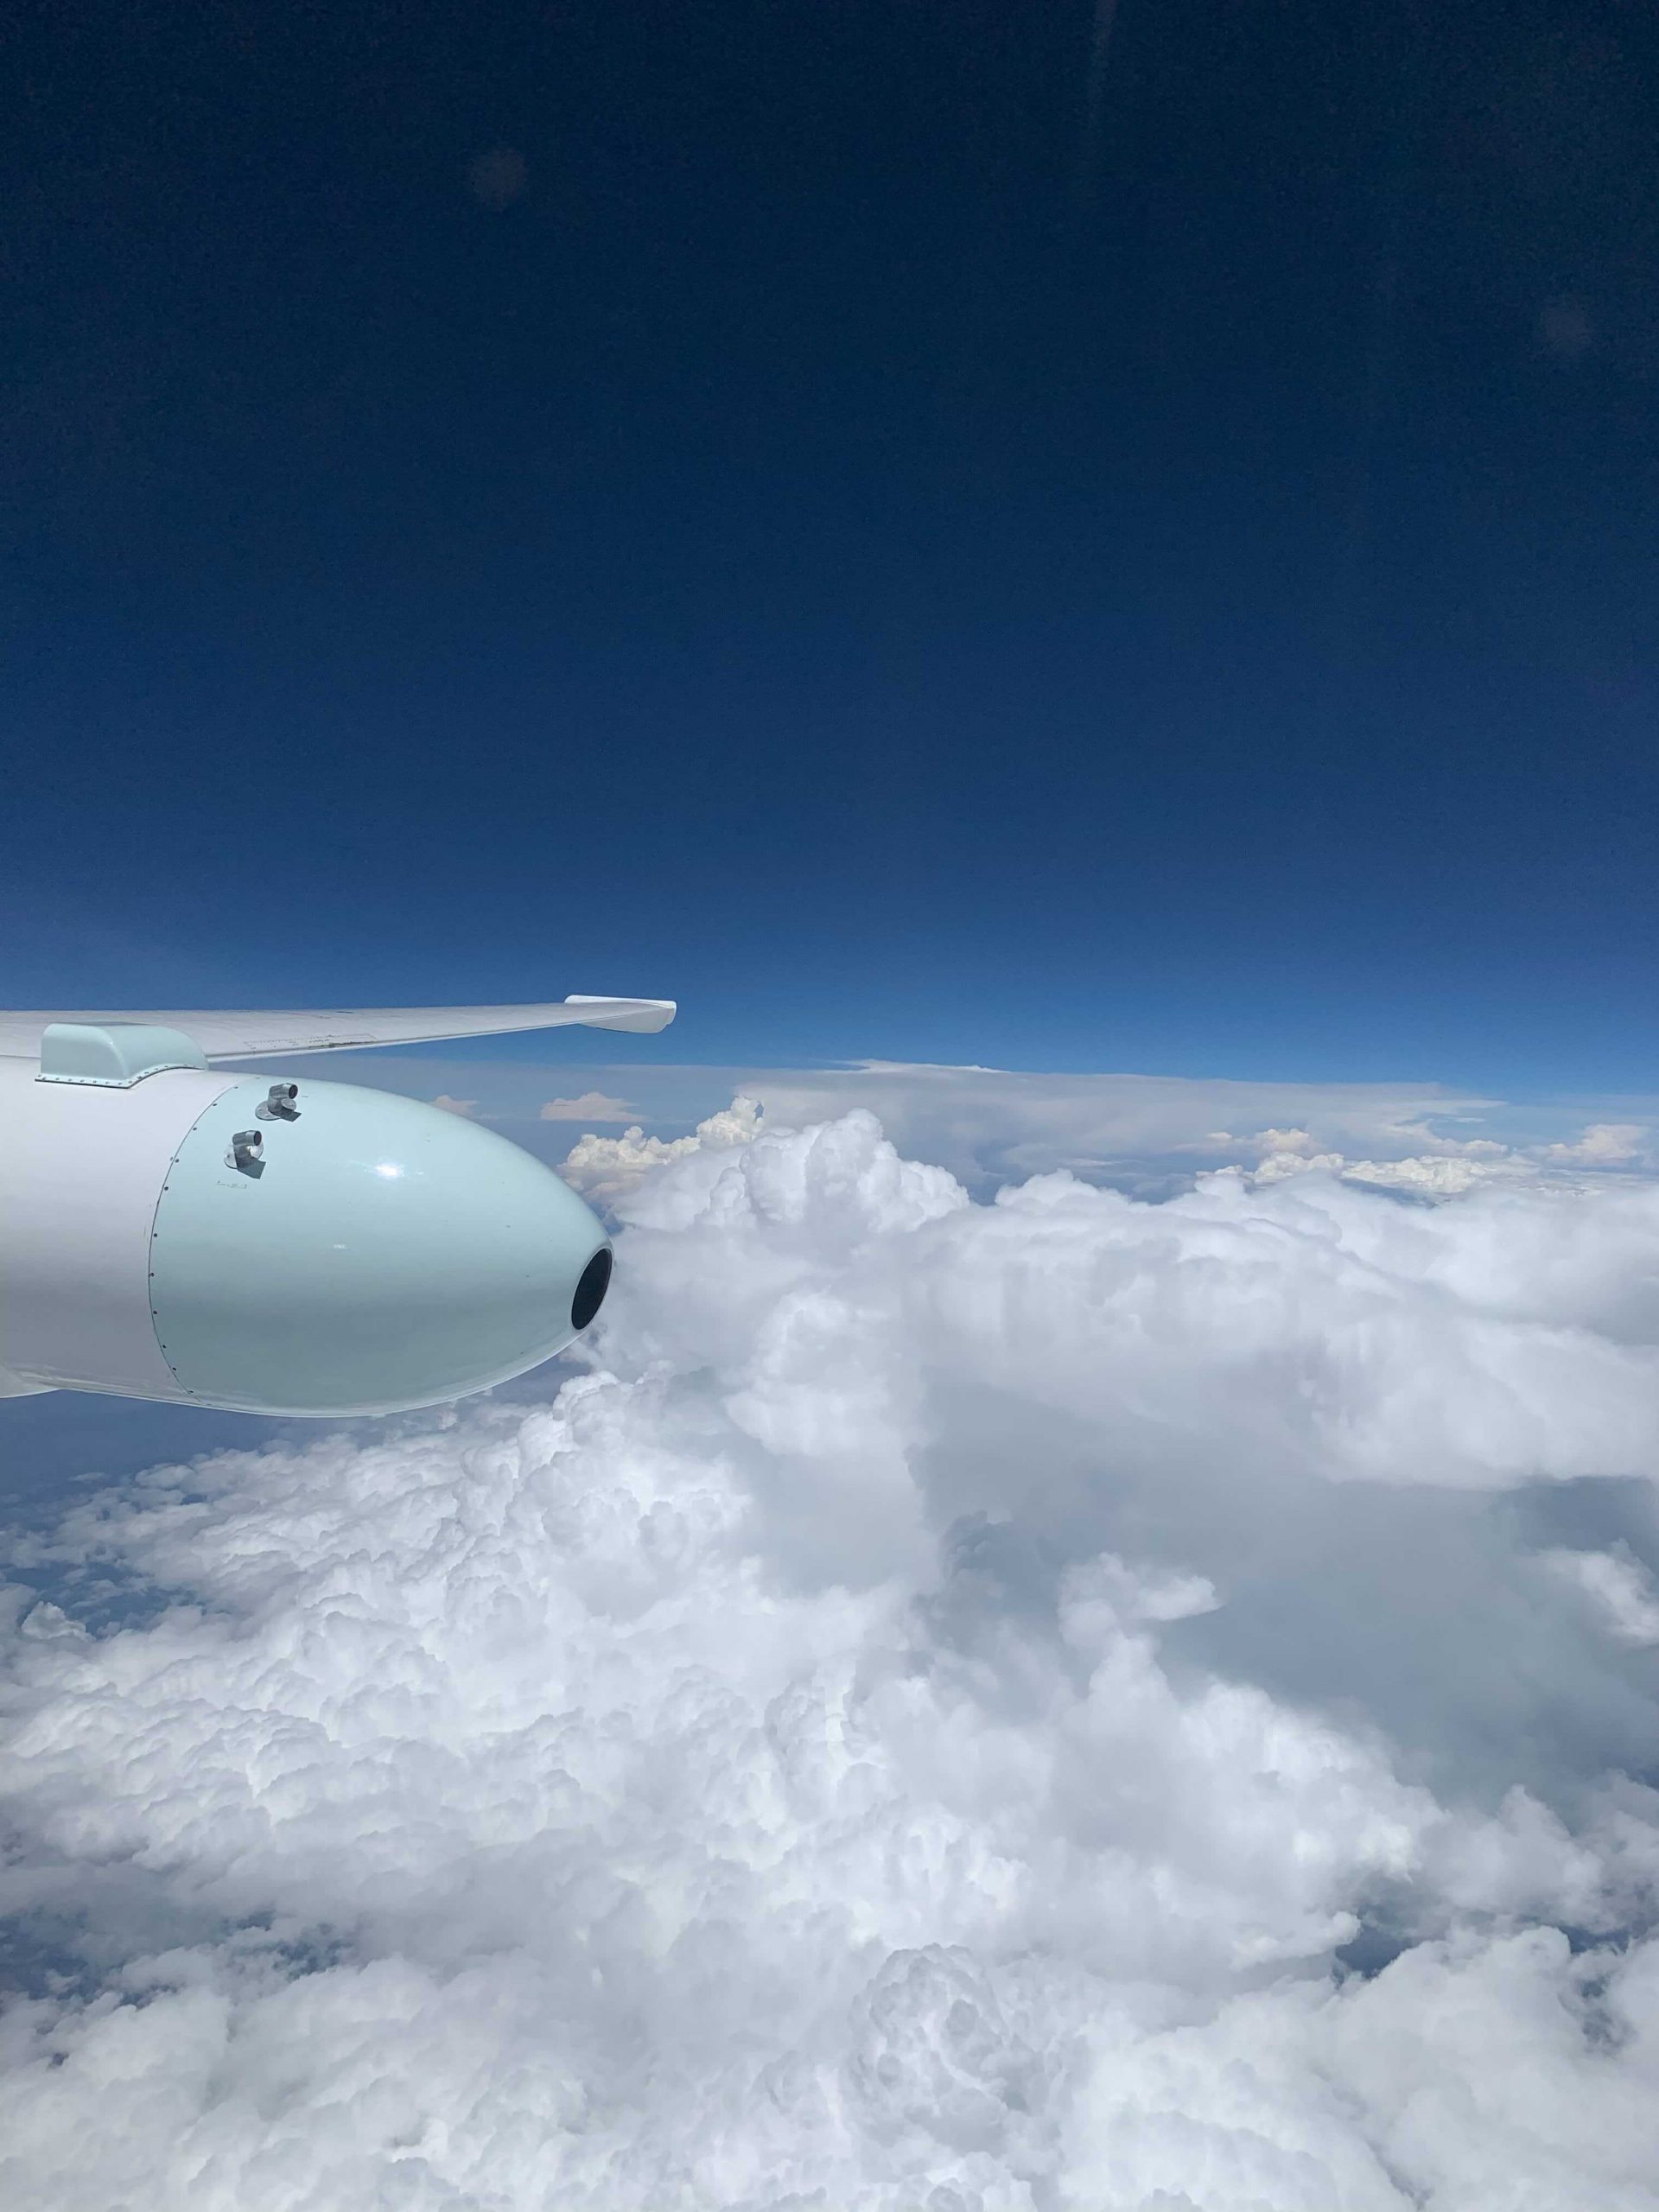 A picture of non-overshooting convective storms reaching up to 45 kft taken by the pilot (Gary “Thor” Toroni) on DCOTSS Research Flight 02 on 20 July 2021. Photo credit: Gary “Thor” Toroni